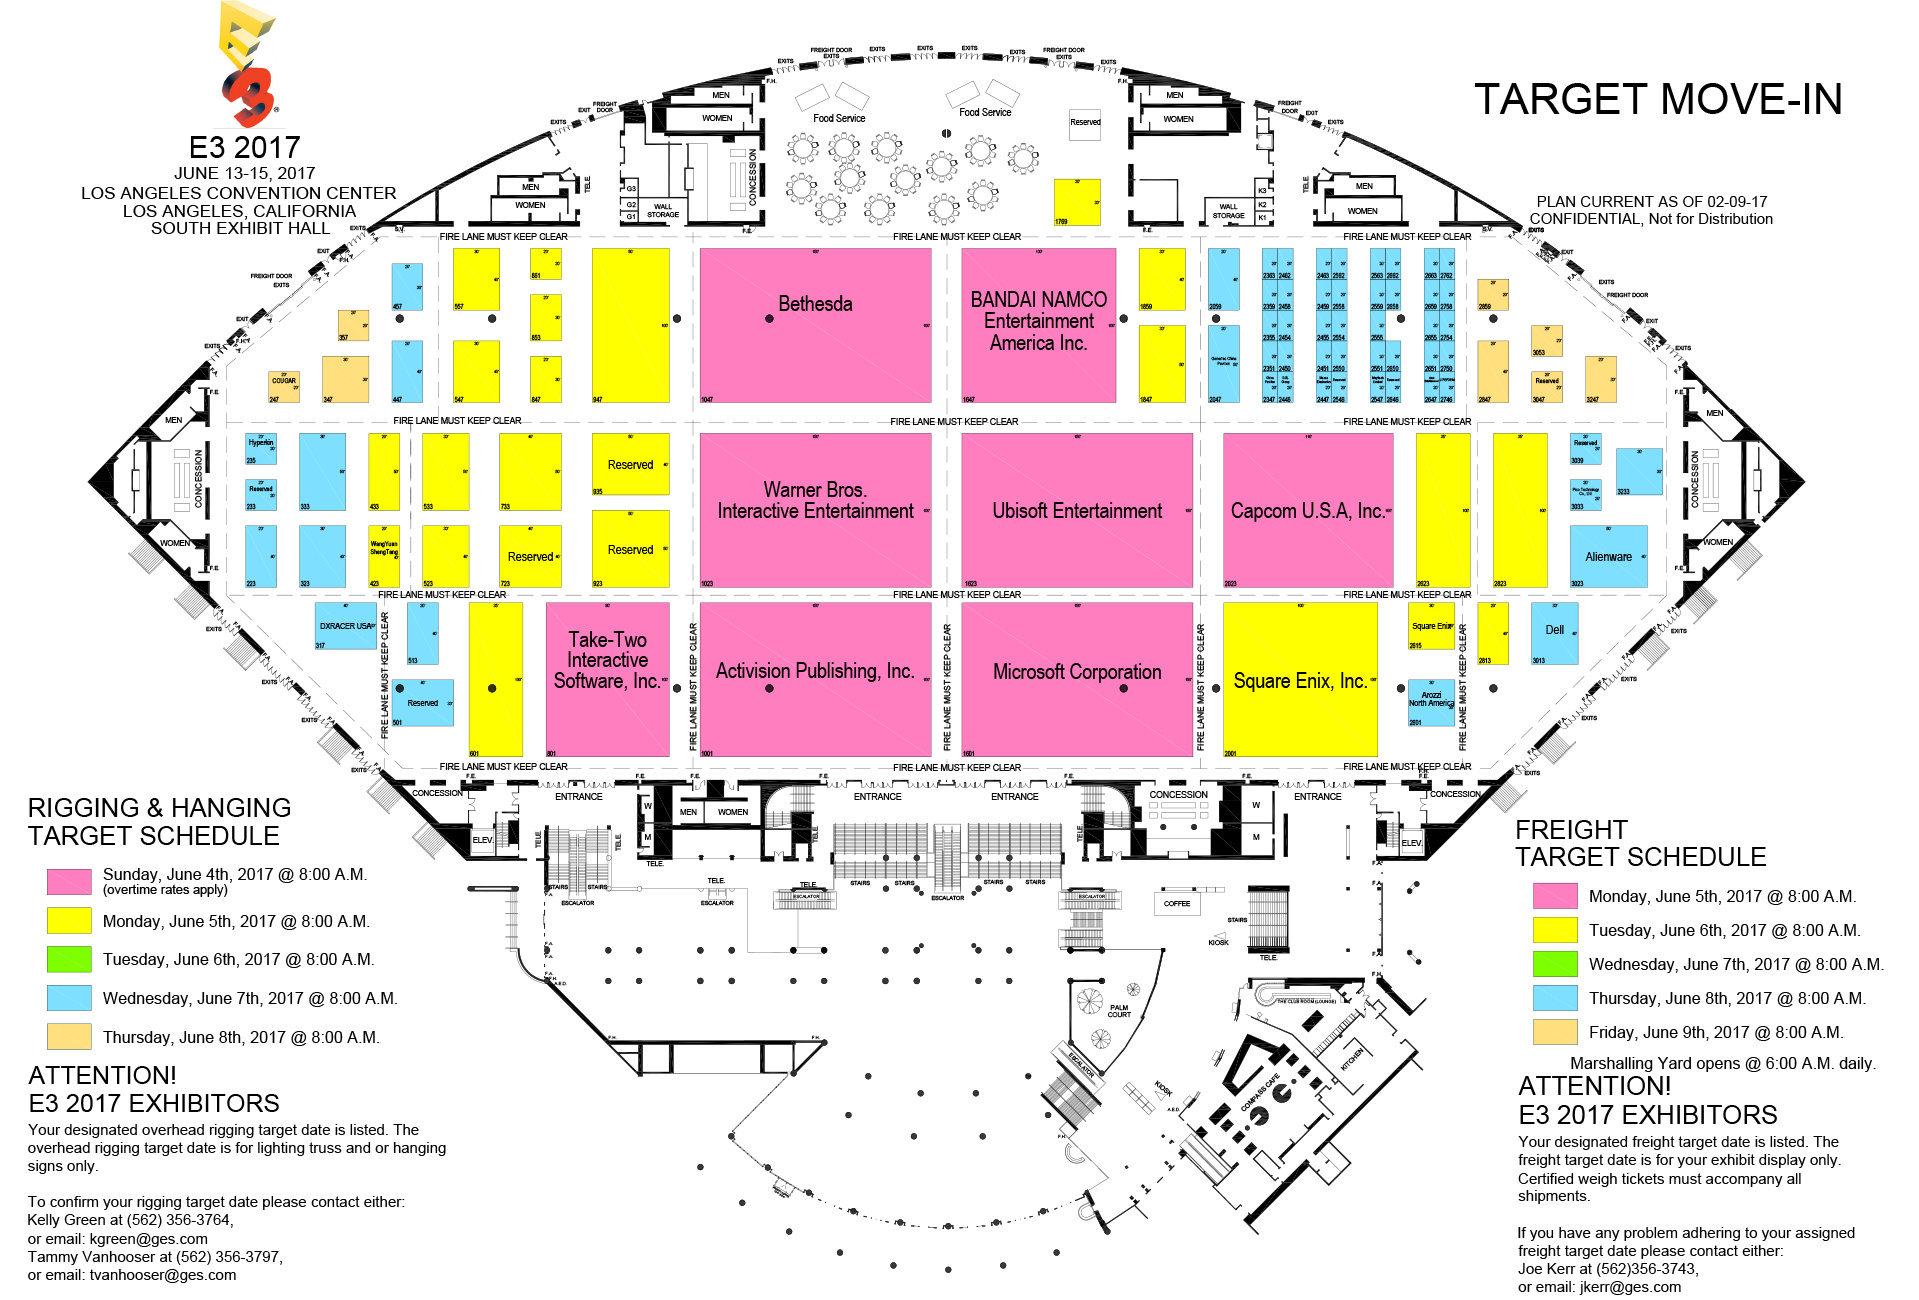 E3 2017 Floor Plans Show Another Sizeable Nintendo Booth